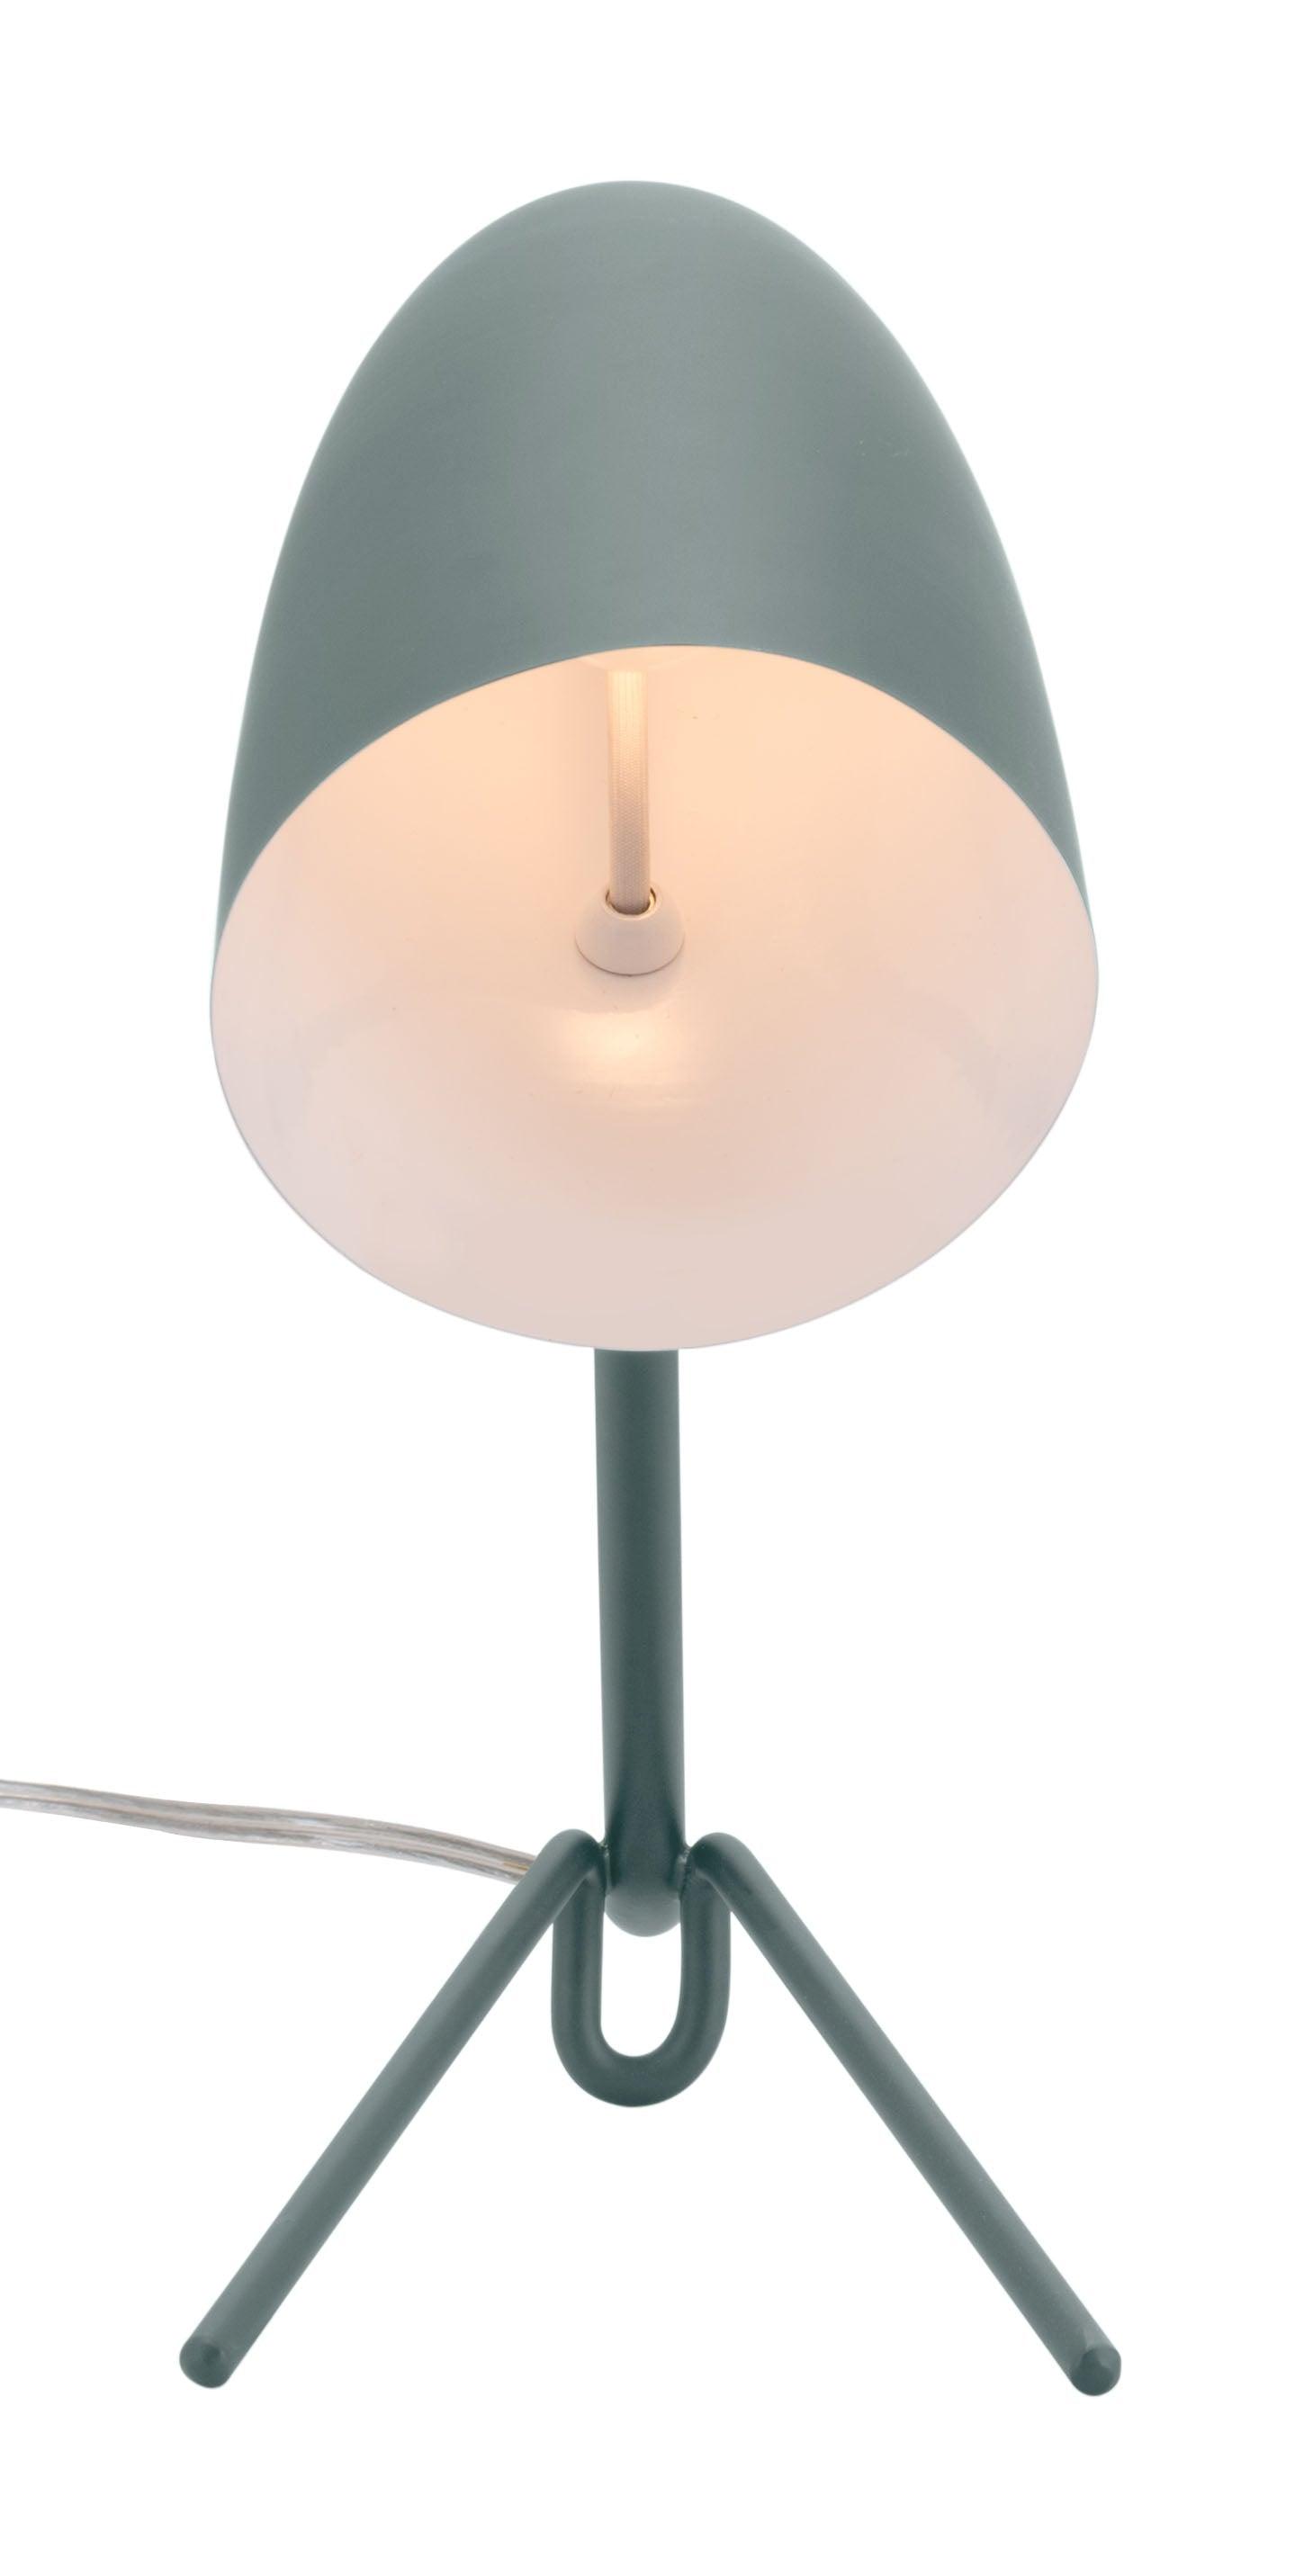 Jamison Table Lamp Matte Green - Sideboards and Things Brand_Zuo Modern, Color_Green, Depth_0-10, Features_Swivel, Finish_Powder Coated, Height_10-20, Materials_Metal, Metal Type_Steel, Product Type_Table Lamp, Width_10-20